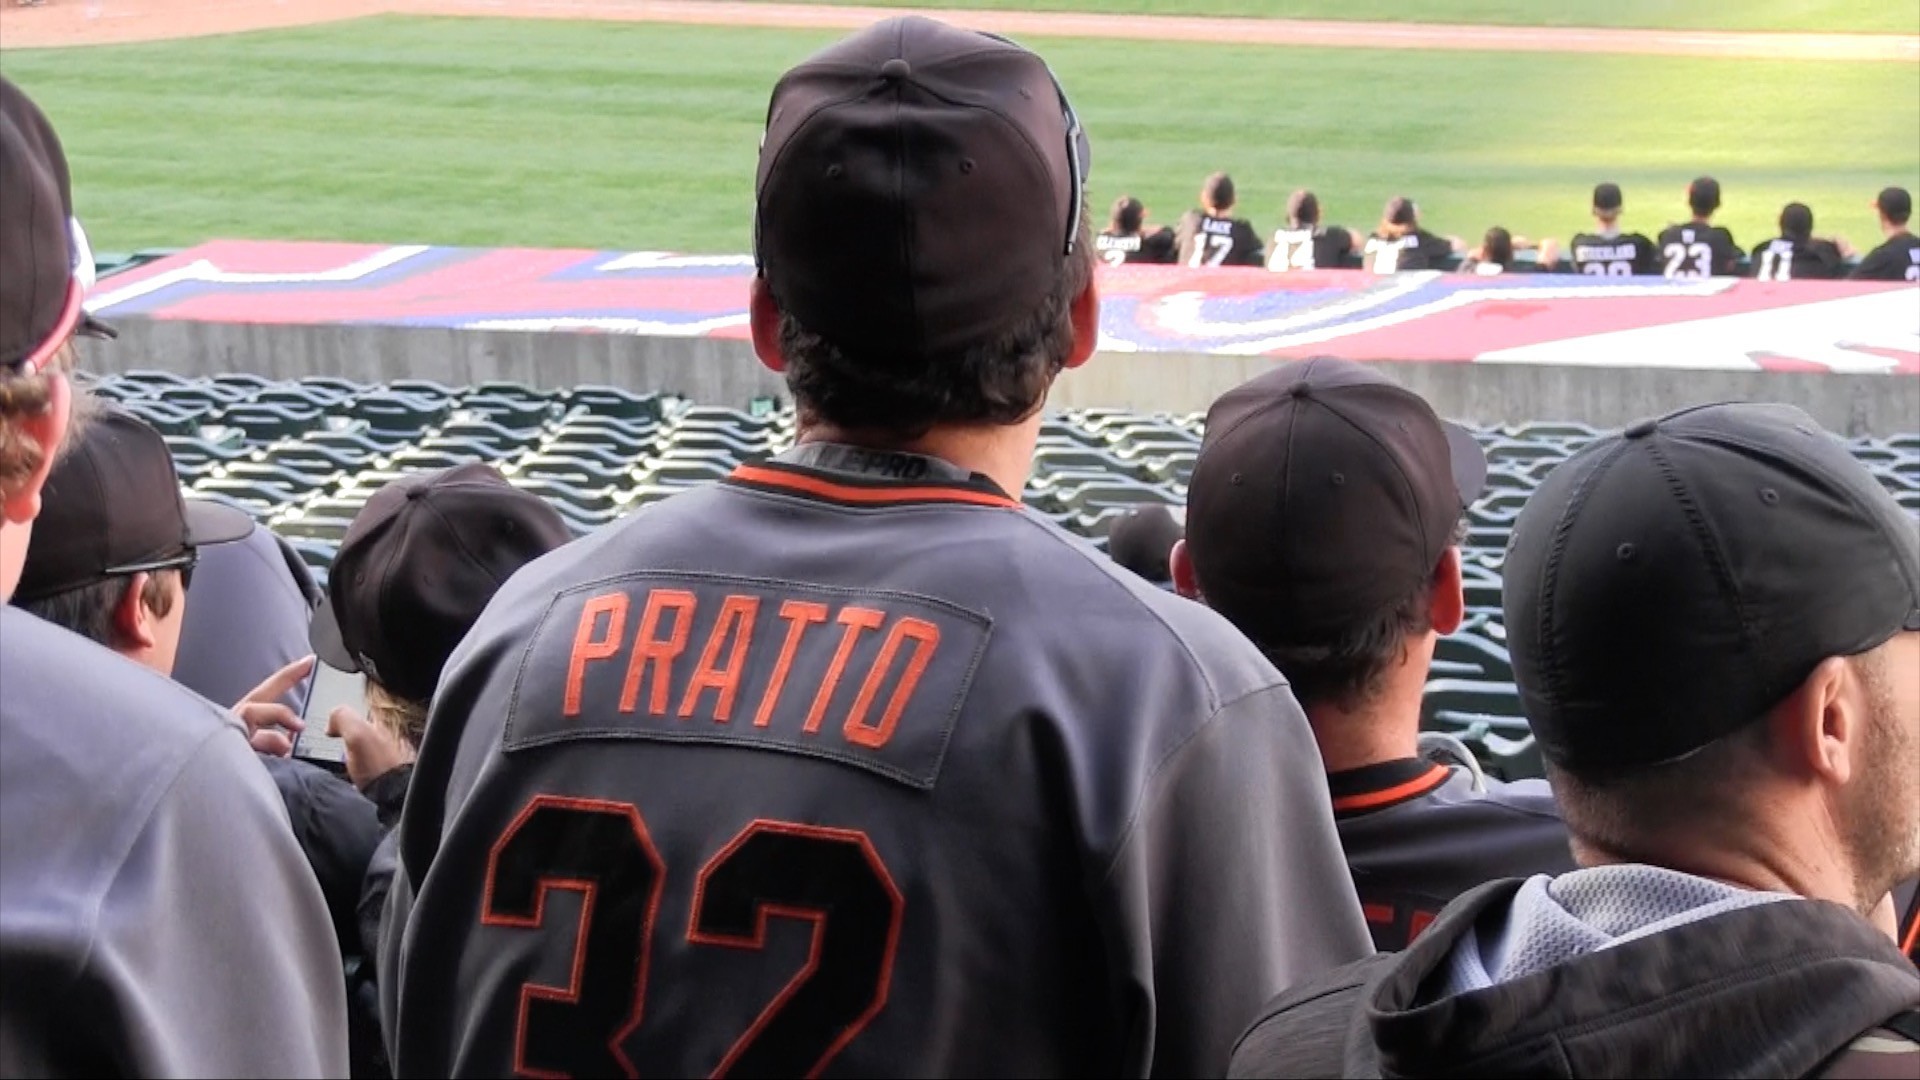 Here are some pictures of 12-year-old Nick Pratto during the 2011